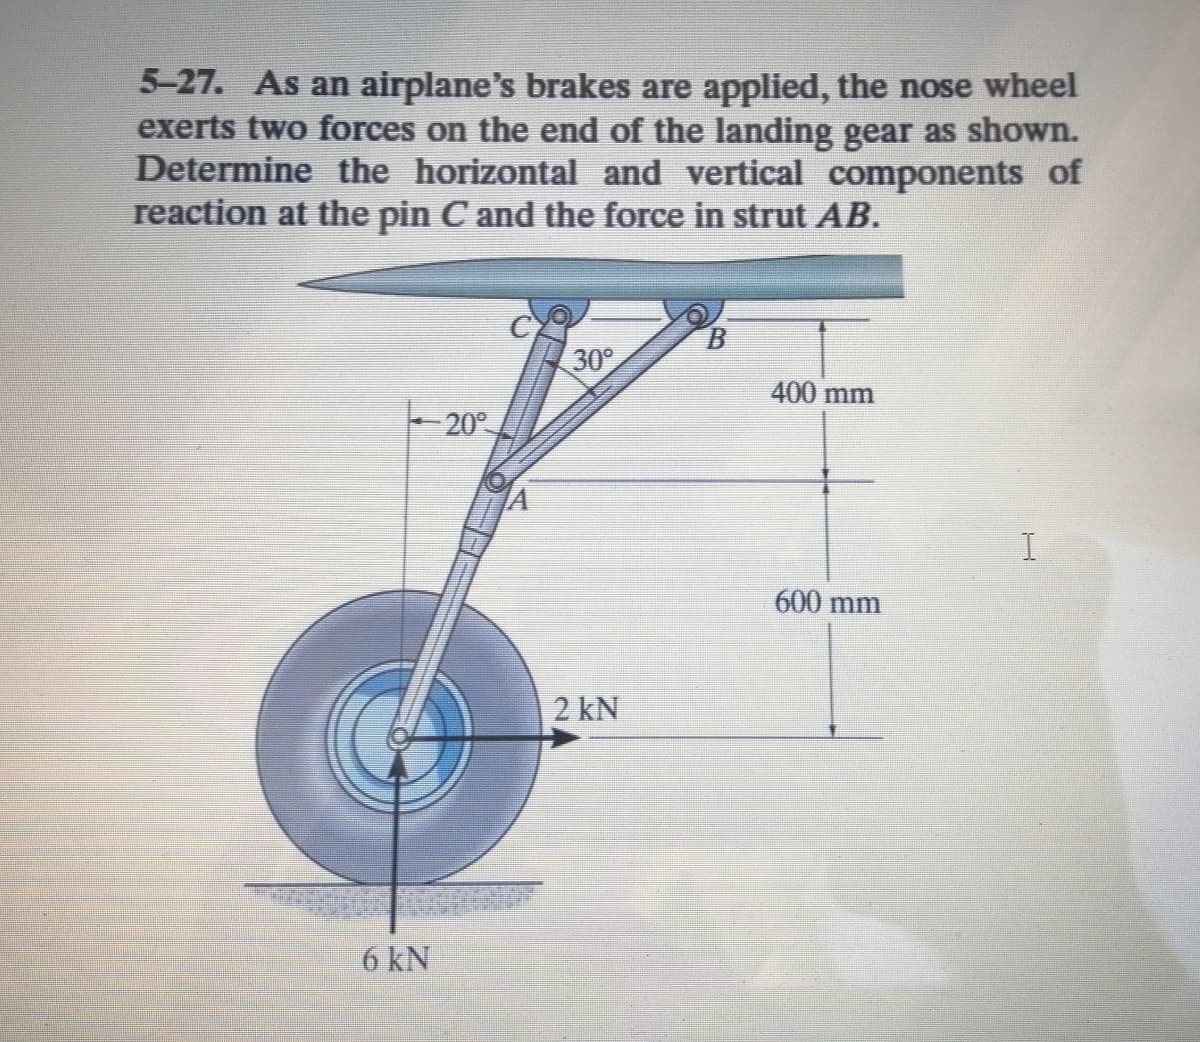 5-27. As an airplane's brakes are applied, the nose wheel
exerts two forces on the end of the landing gear as shown.
Determine the horizontal and vertical components of
reaction at the pin C and the force in strut AB.
B.
30°
400 mm
20°
600 mm
2 kN
6 kN
